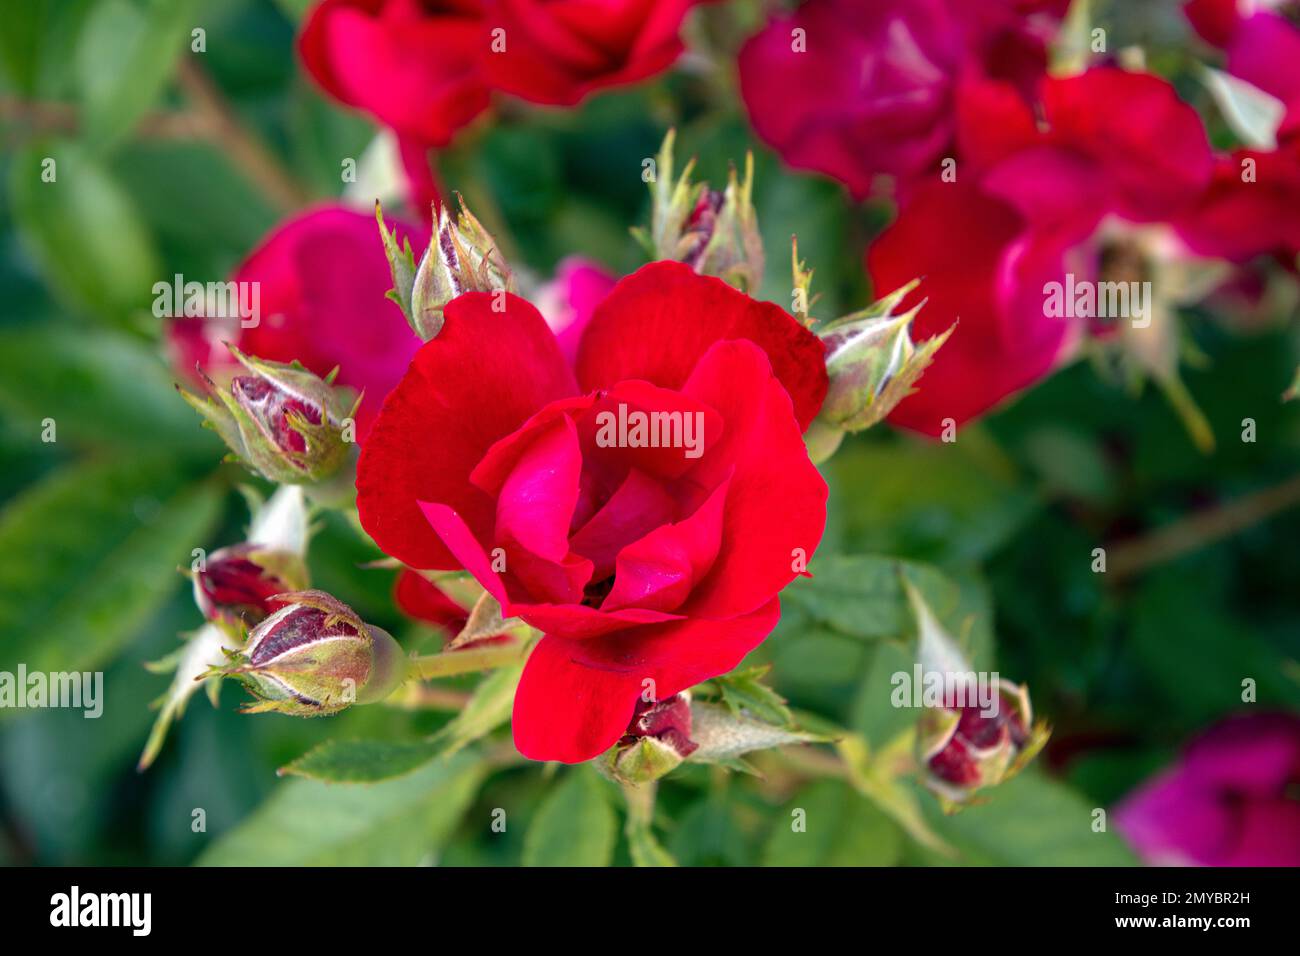 Close-up of red roses with buds on a rosebush Stock Photo